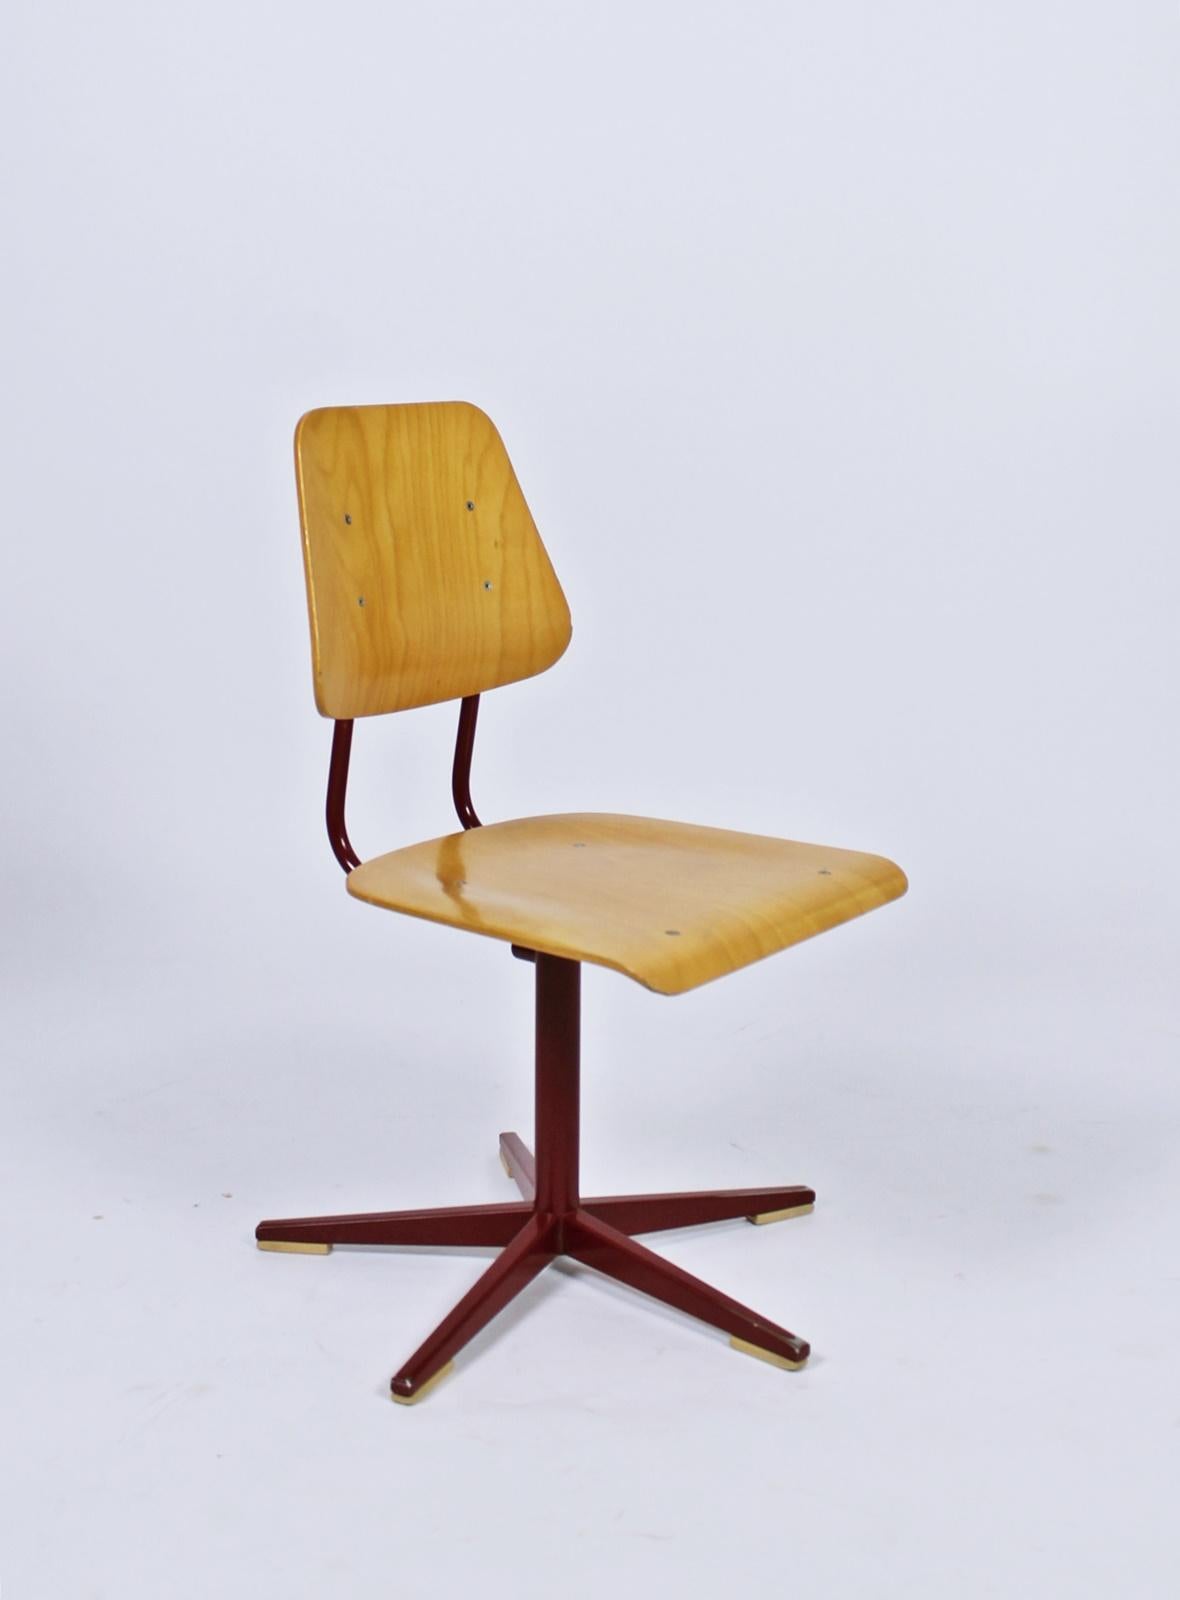 Vintage 1960s Swiss made Embru school chairs, made of plywood and enameled steel. With adjustable height. Five leg star base. Fully original condition.
Dimensions:
Height: 71-86 cm
Width: 37 cm
Depth: 45 cm
Seat height: 35-50 cm.